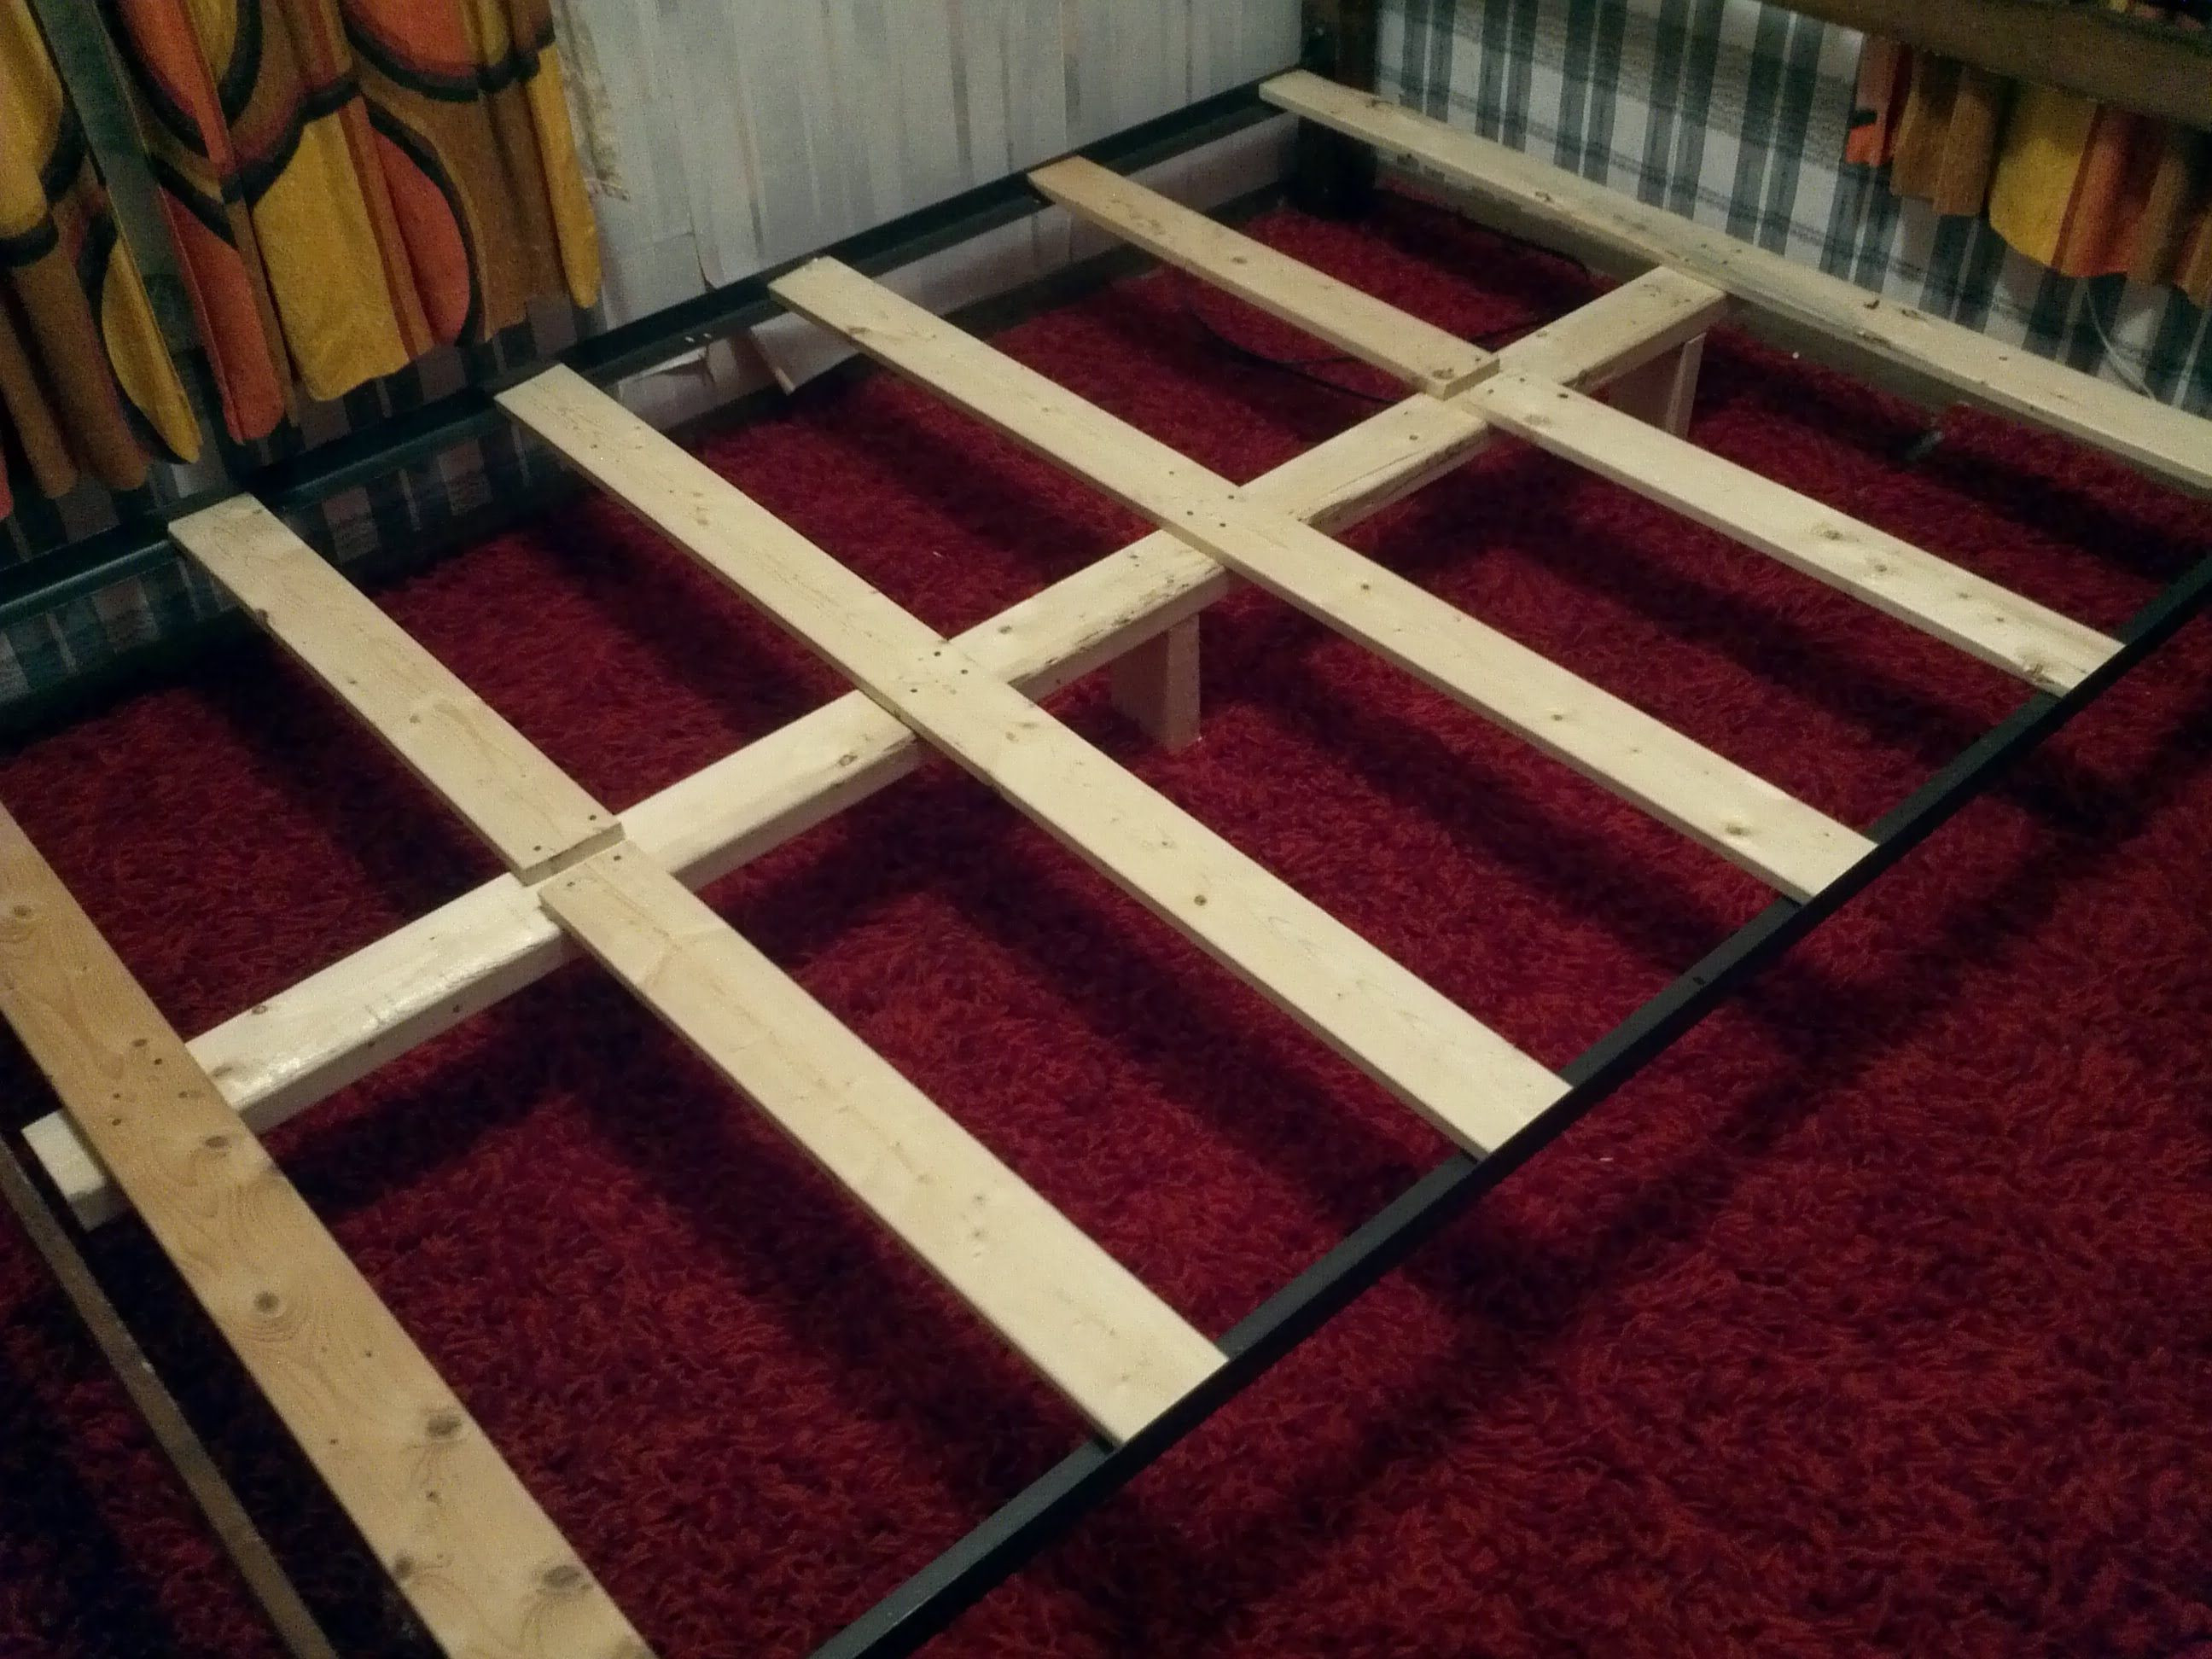 DIY Box Spring Bed Frame
 How To Support a Mattress Without a Box Spring Build a